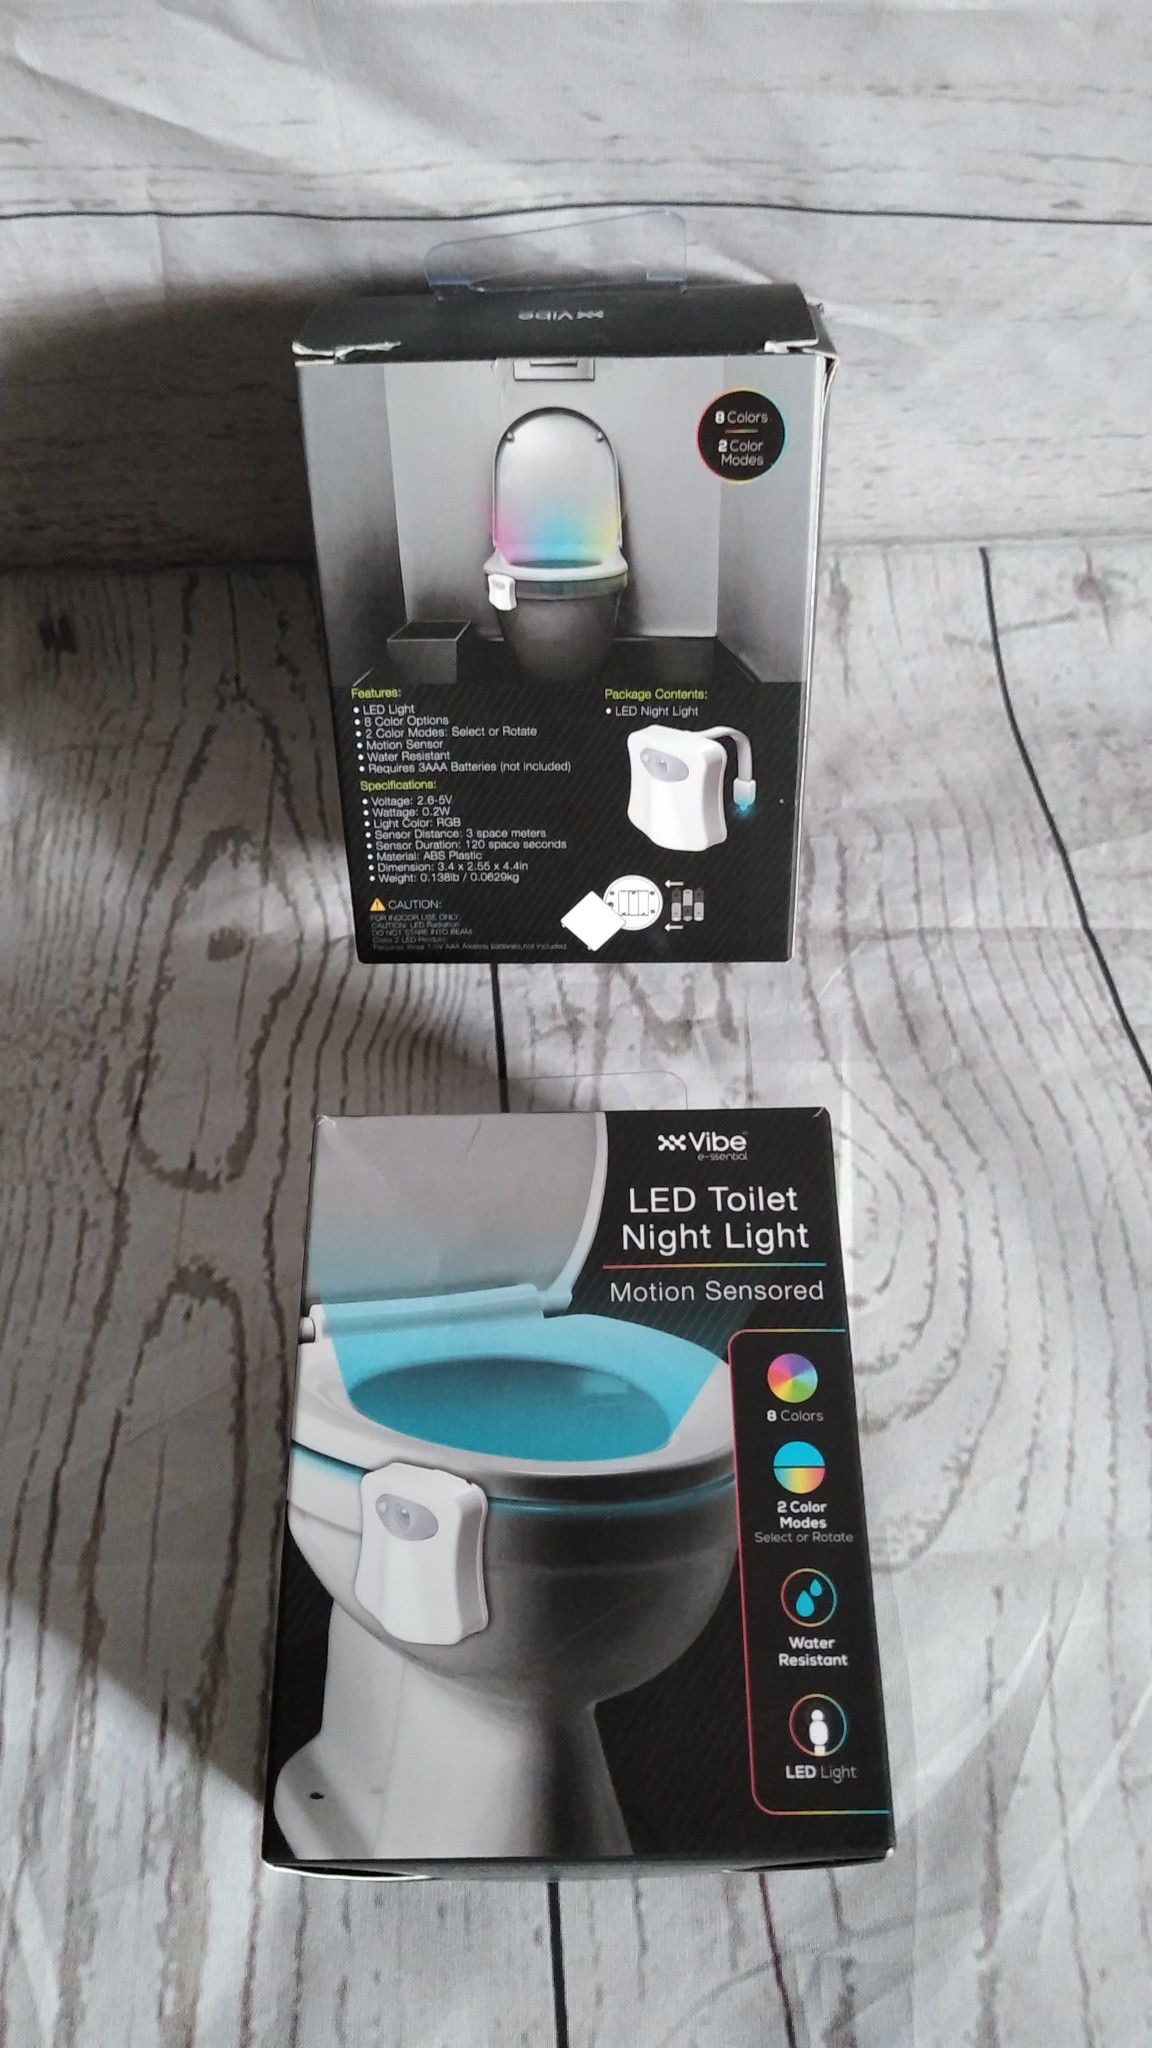 2 New LED Toilet Night Light , price for both ( never used )